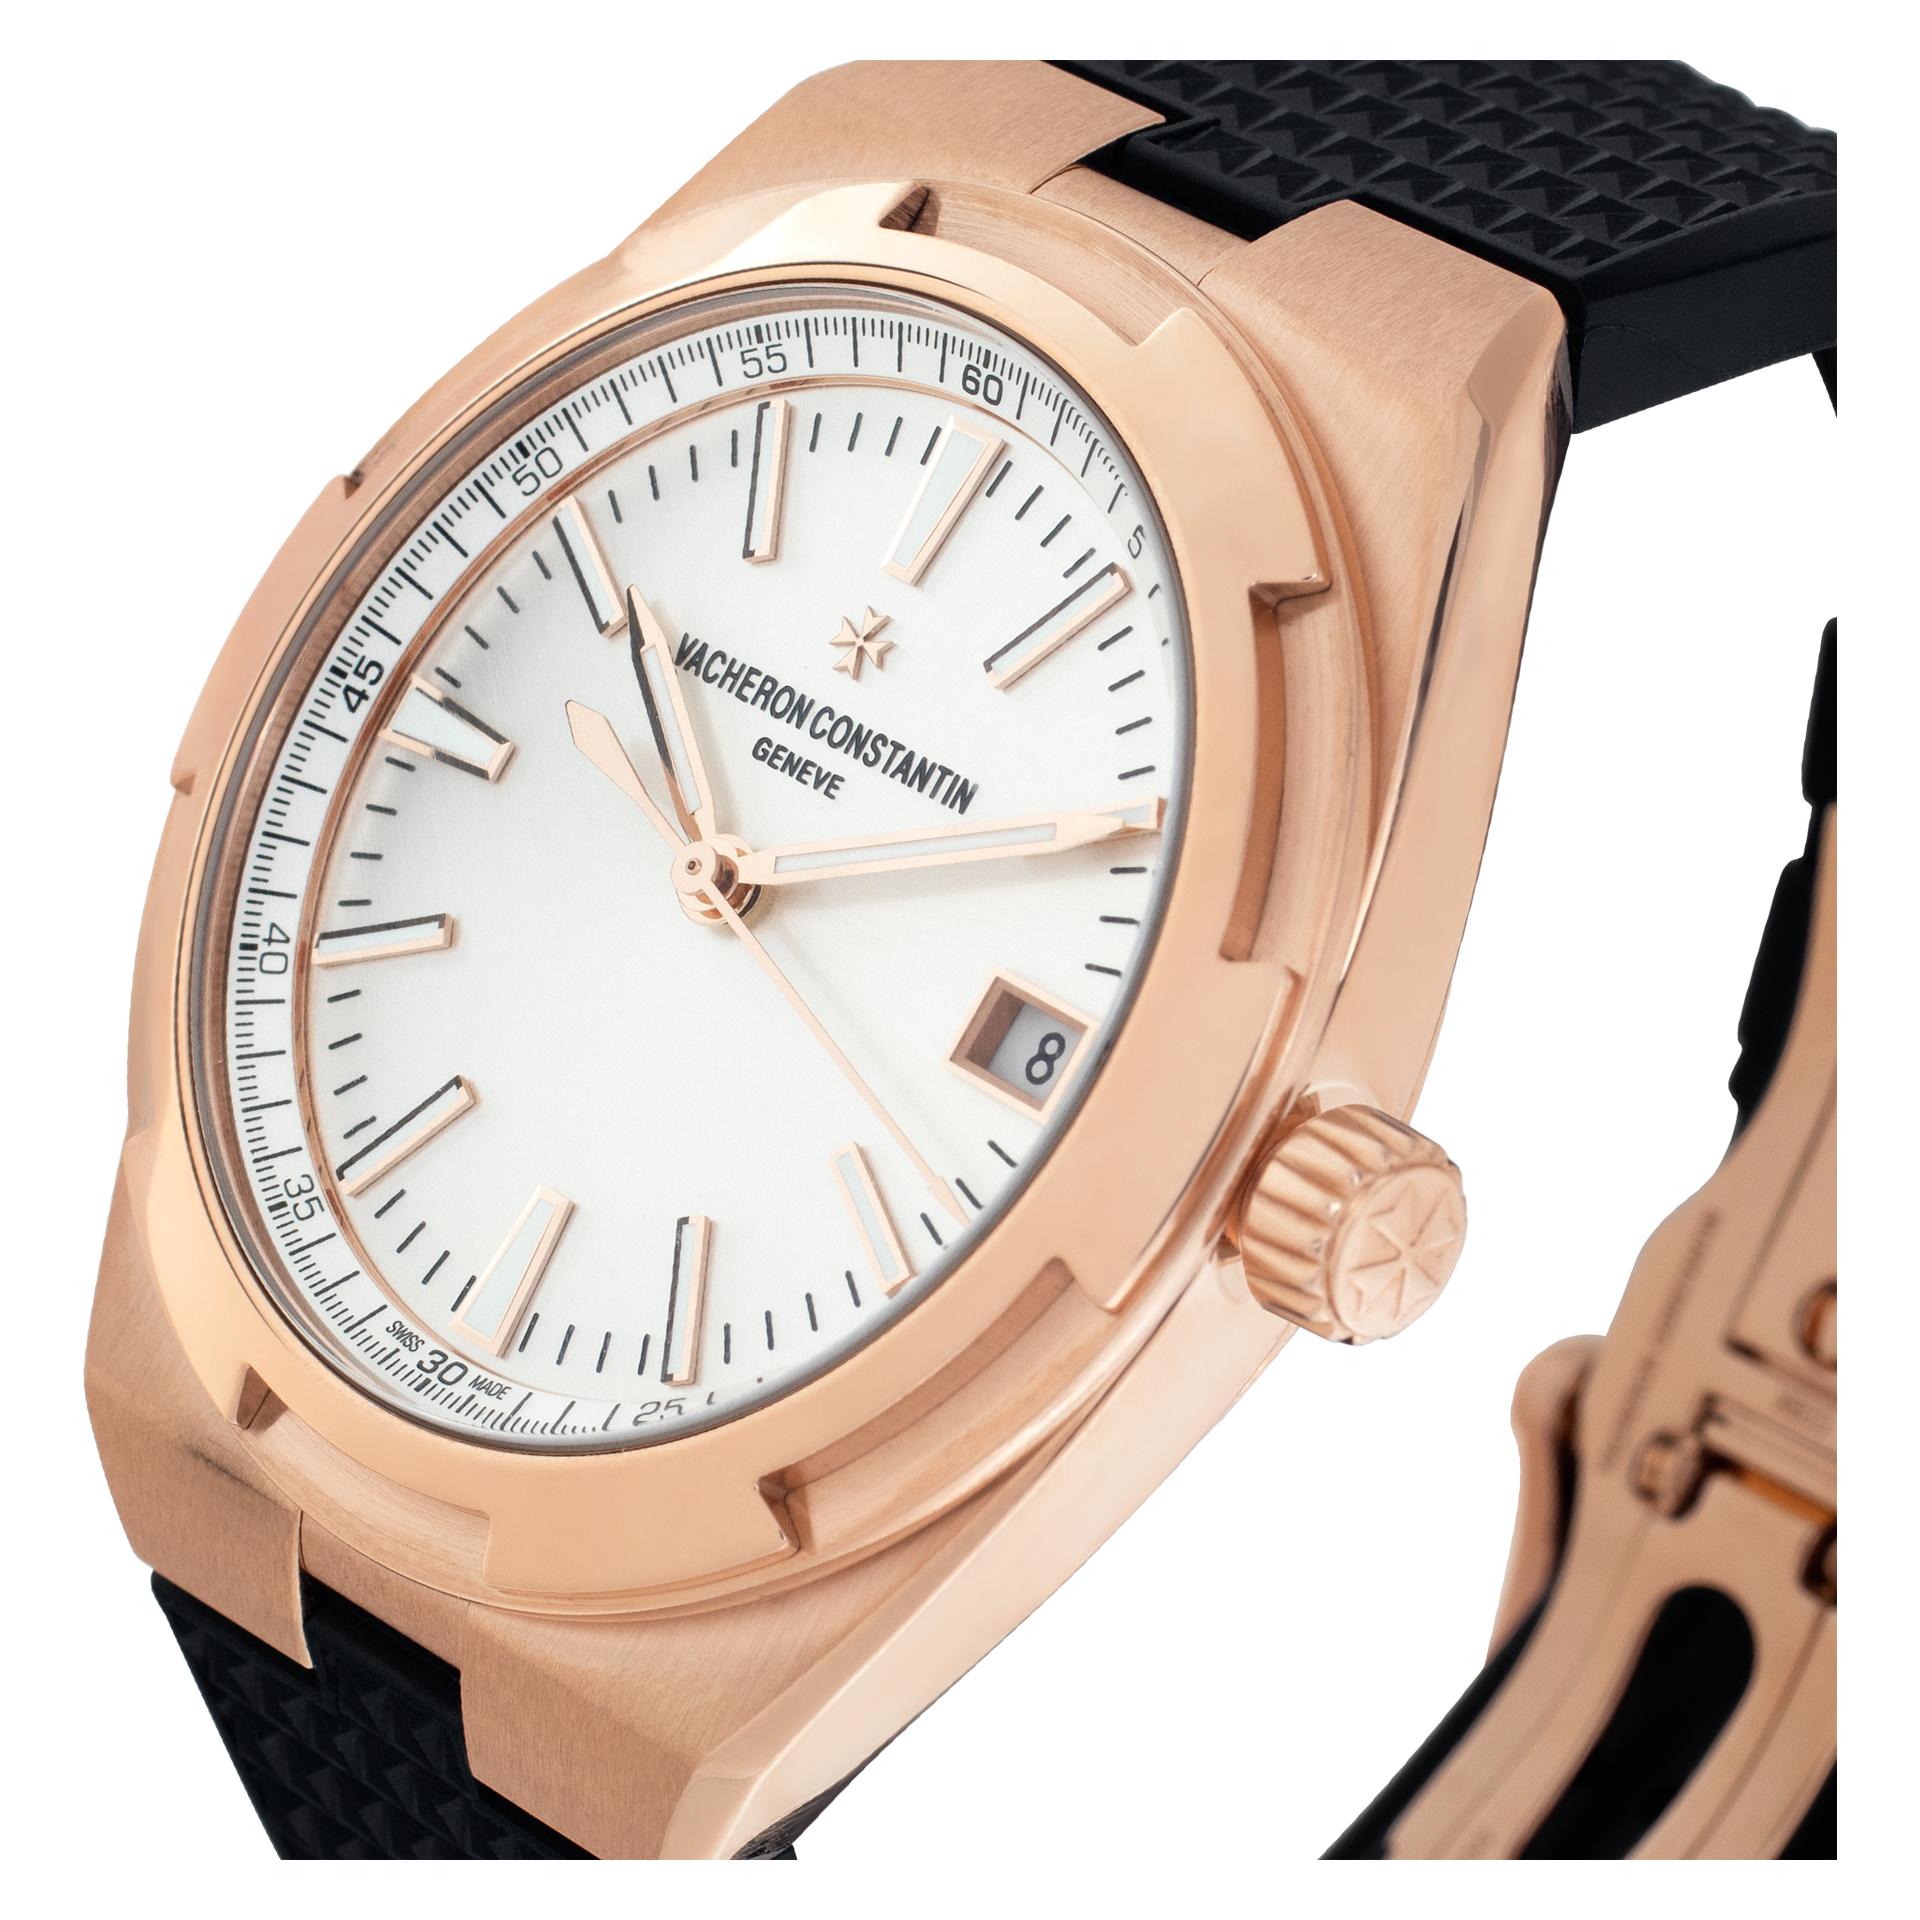 New Arrival! Vacheron Constantin Overseas in 18k rose gold on a blue rubber strap with deployant buckle. Auto w/ sweep seconds and date. 41 mm case size. Unused with brown leather strap, box and papers. **Bank wire only at this price** Ref